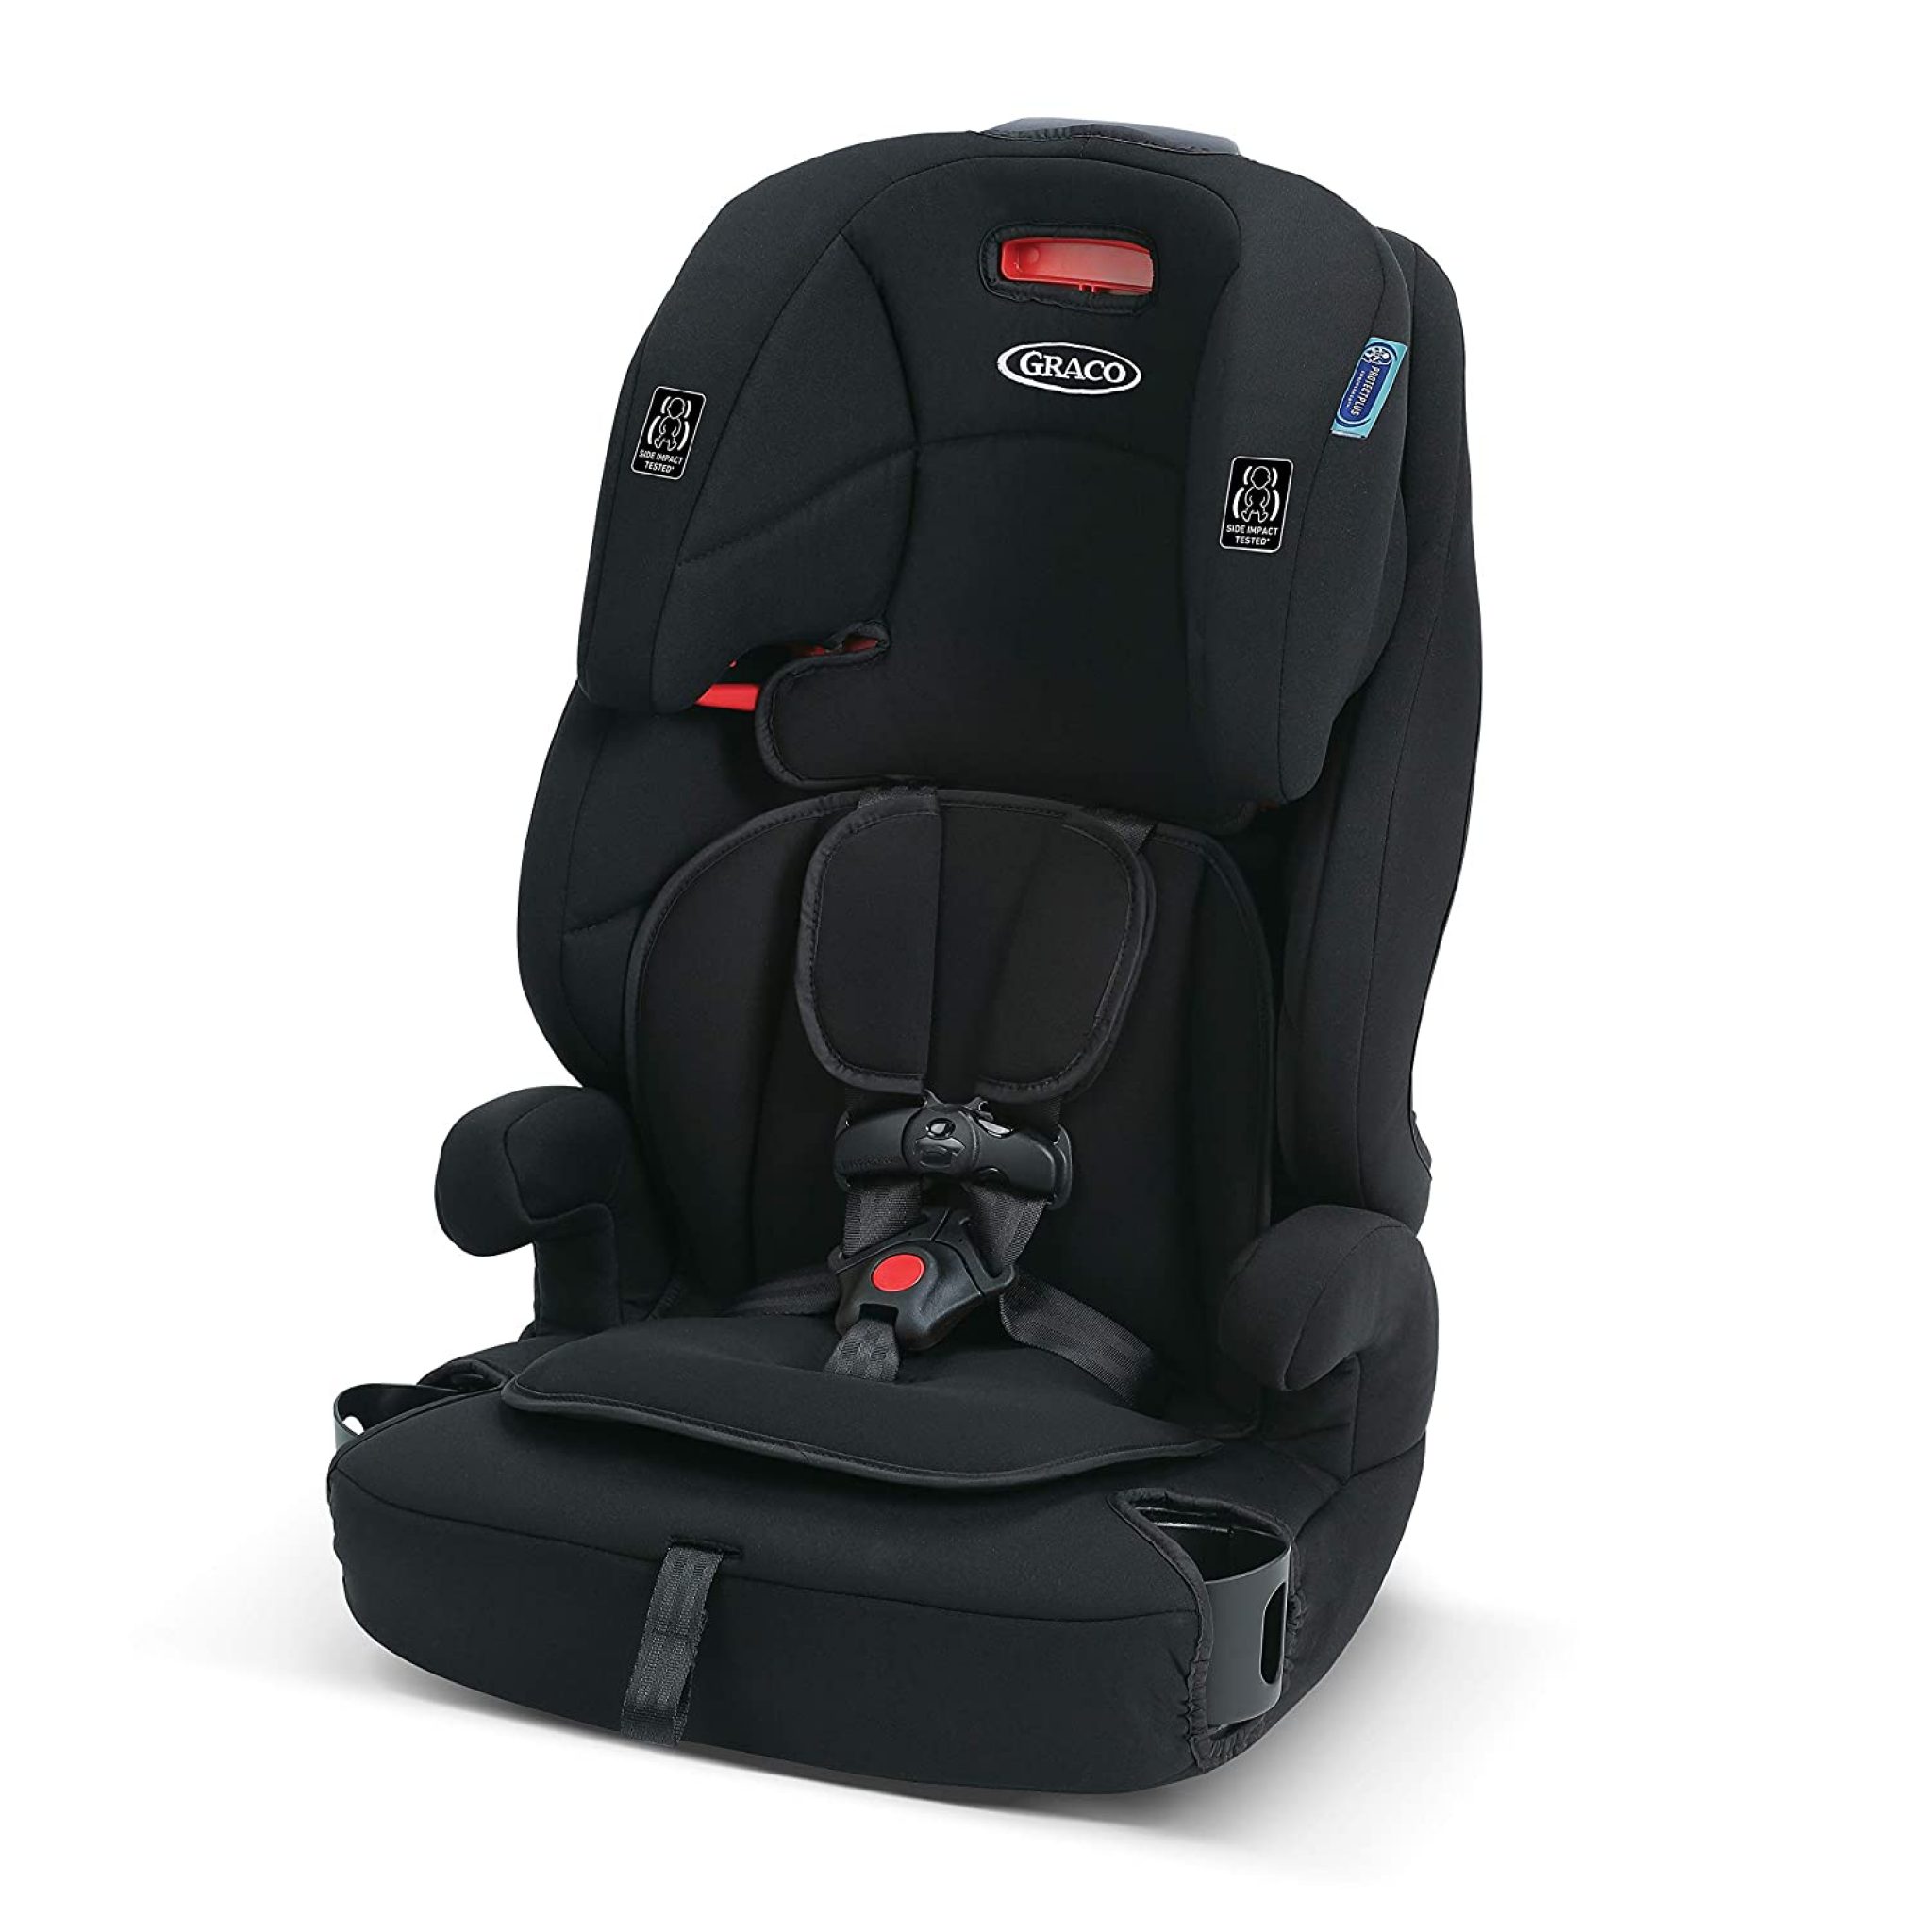 travel car seat over 40 lbs